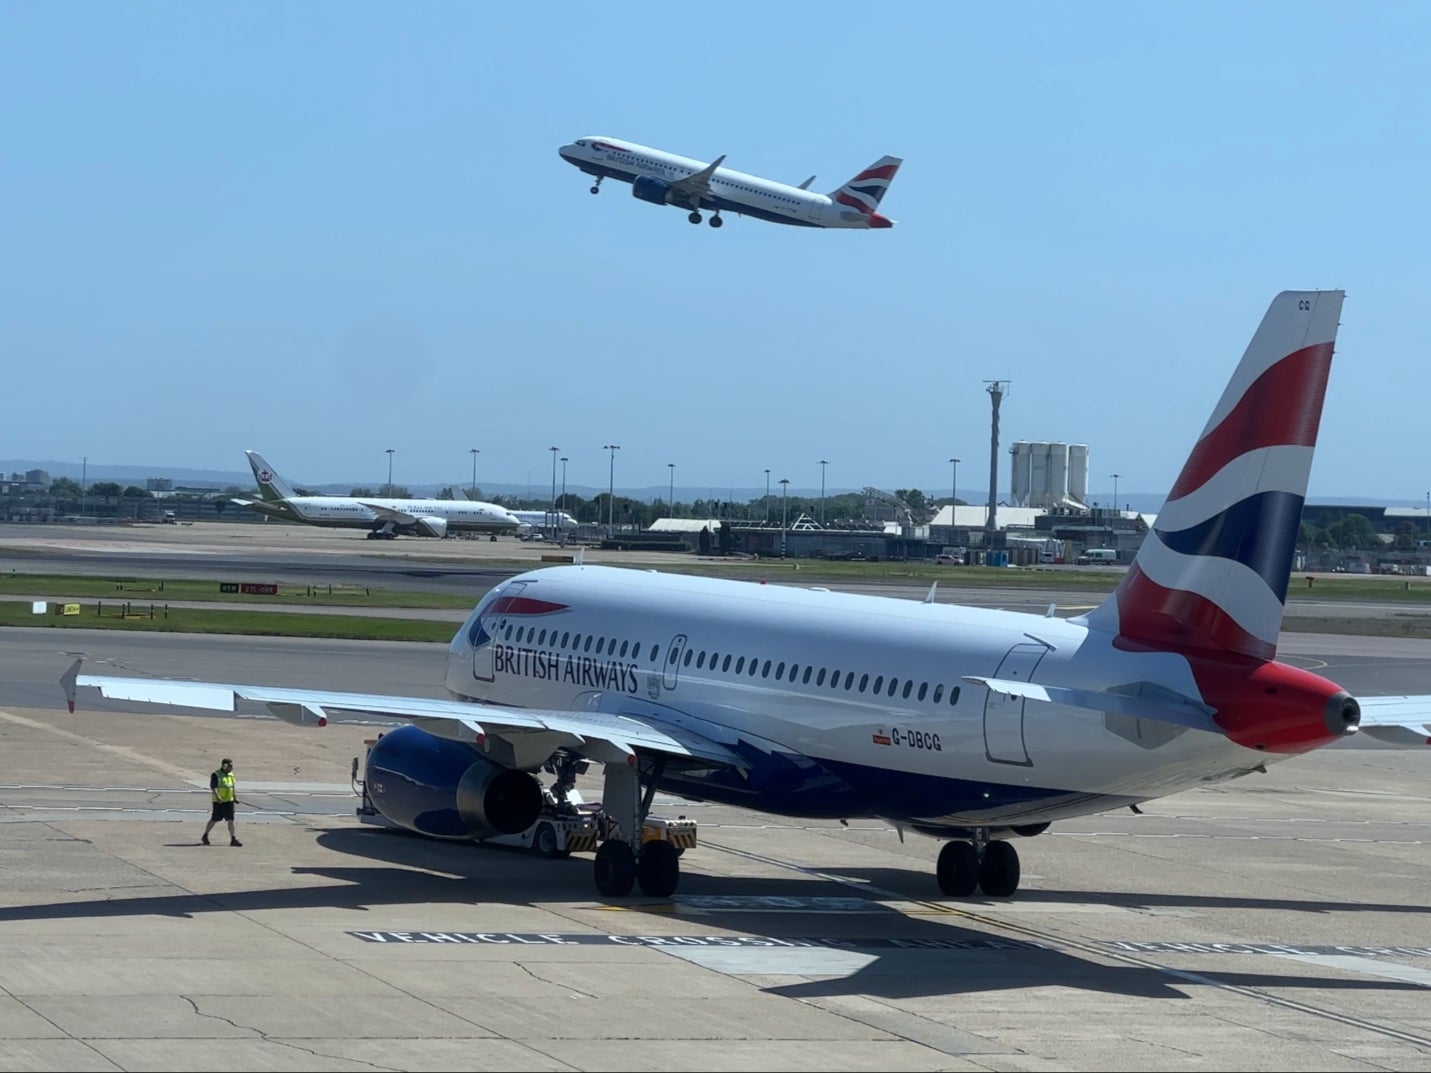 London Heathrow Airport Raising Passenger Charge - One Mile at a Time